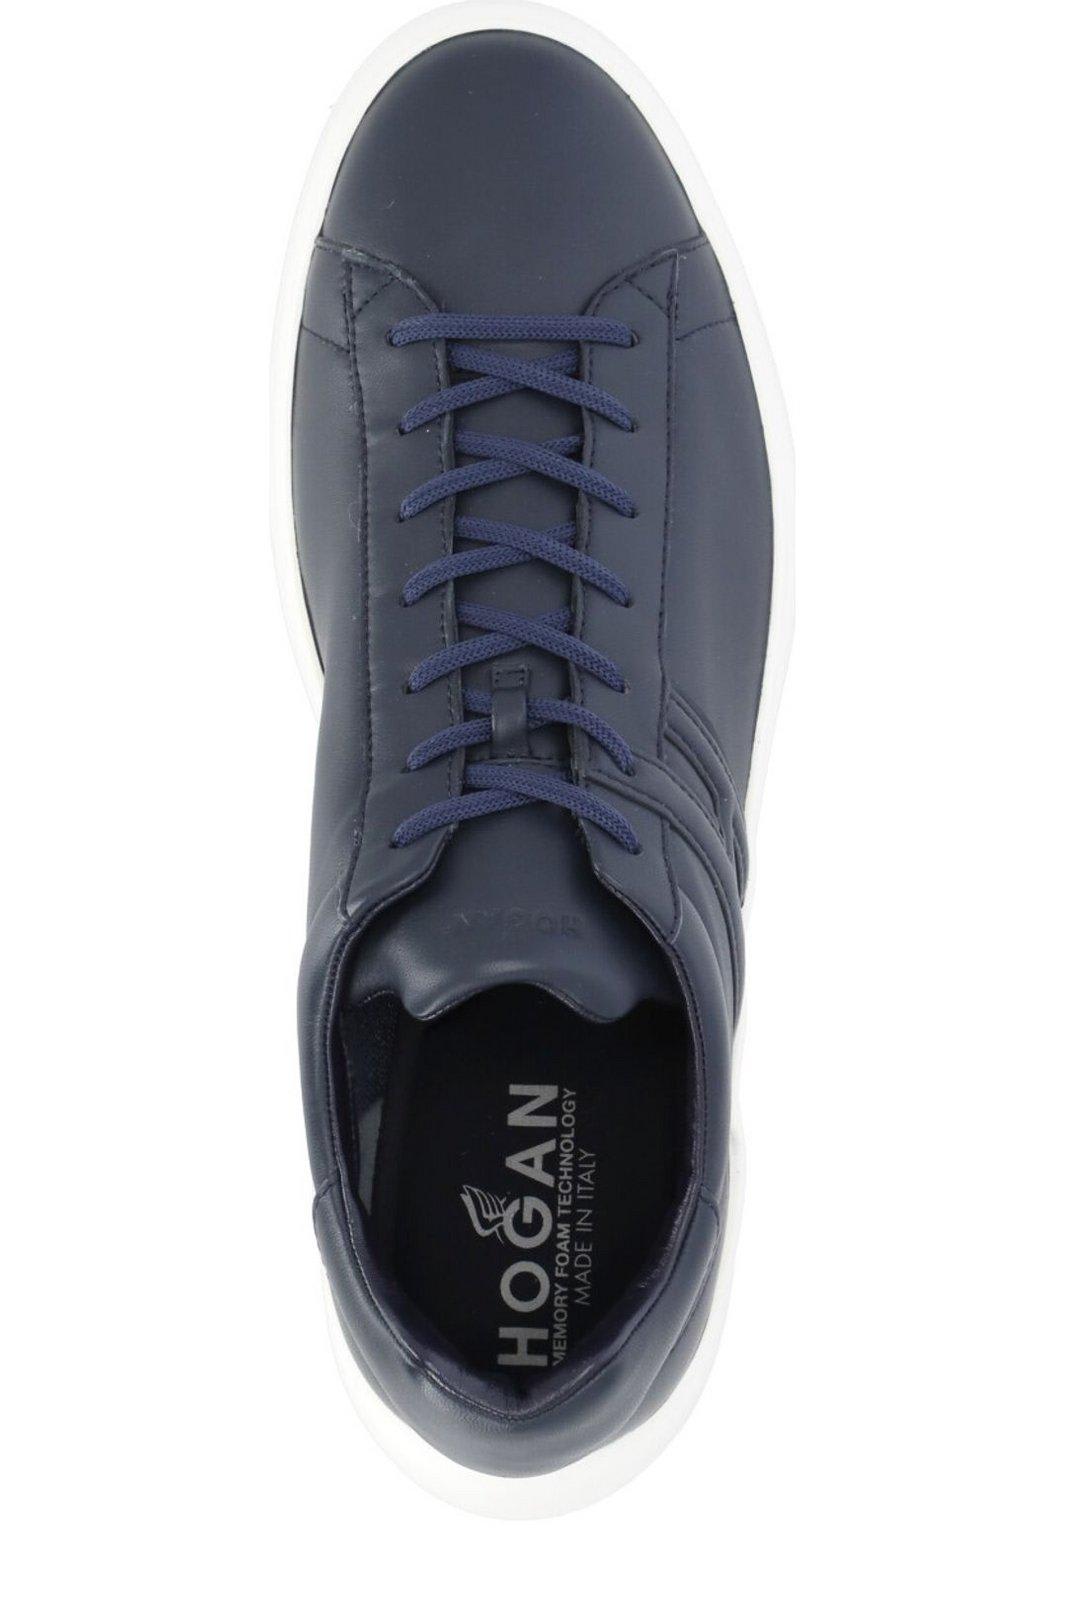 Shop Hogan H580 Lace-up Sneakers In Navy